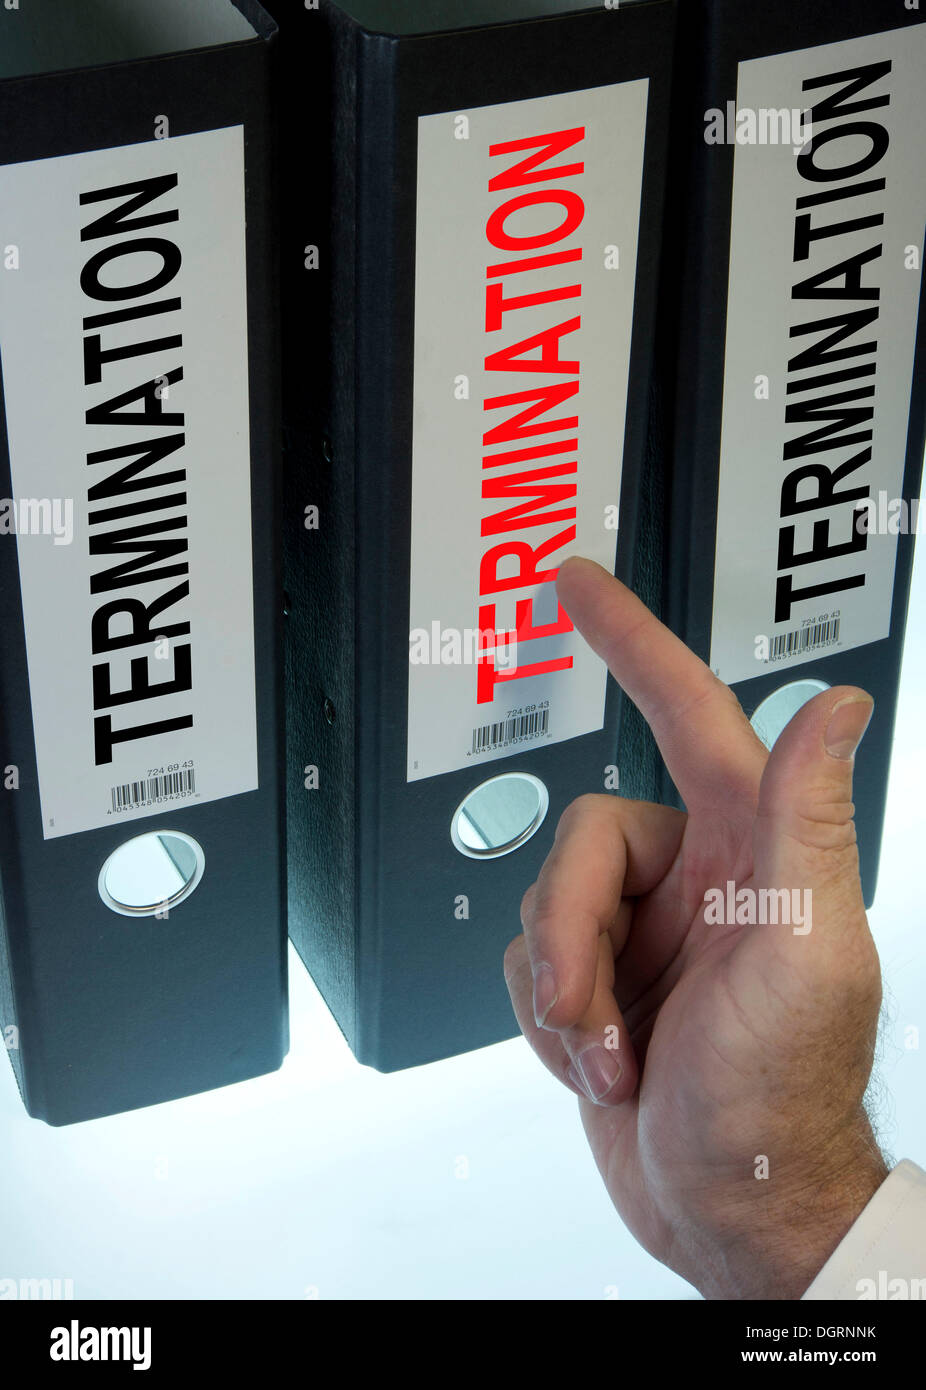 Hand pointing to a ring binder labelled 'TERMINATION' Stock Photo